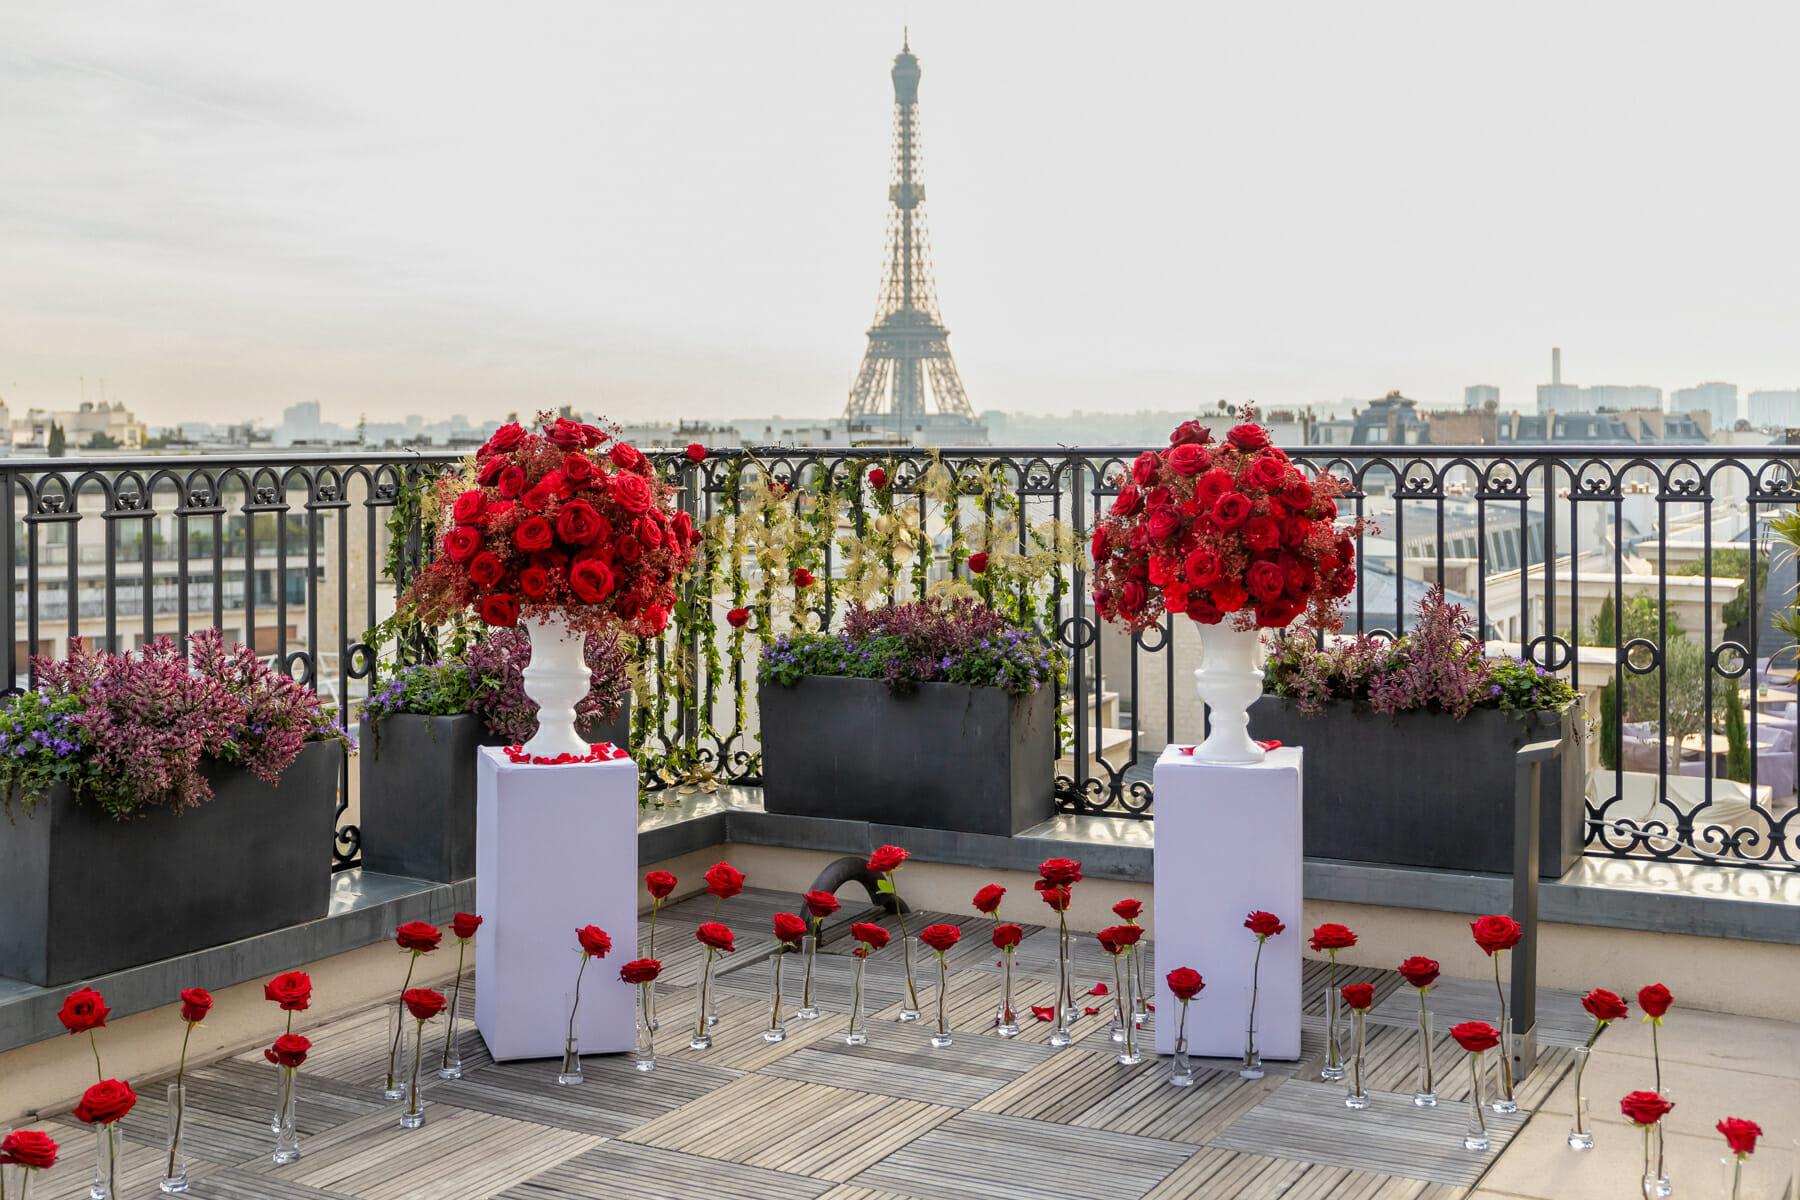 Secret Table Peninsula Paris proposal with stunning red Floral Arrangements made of roses